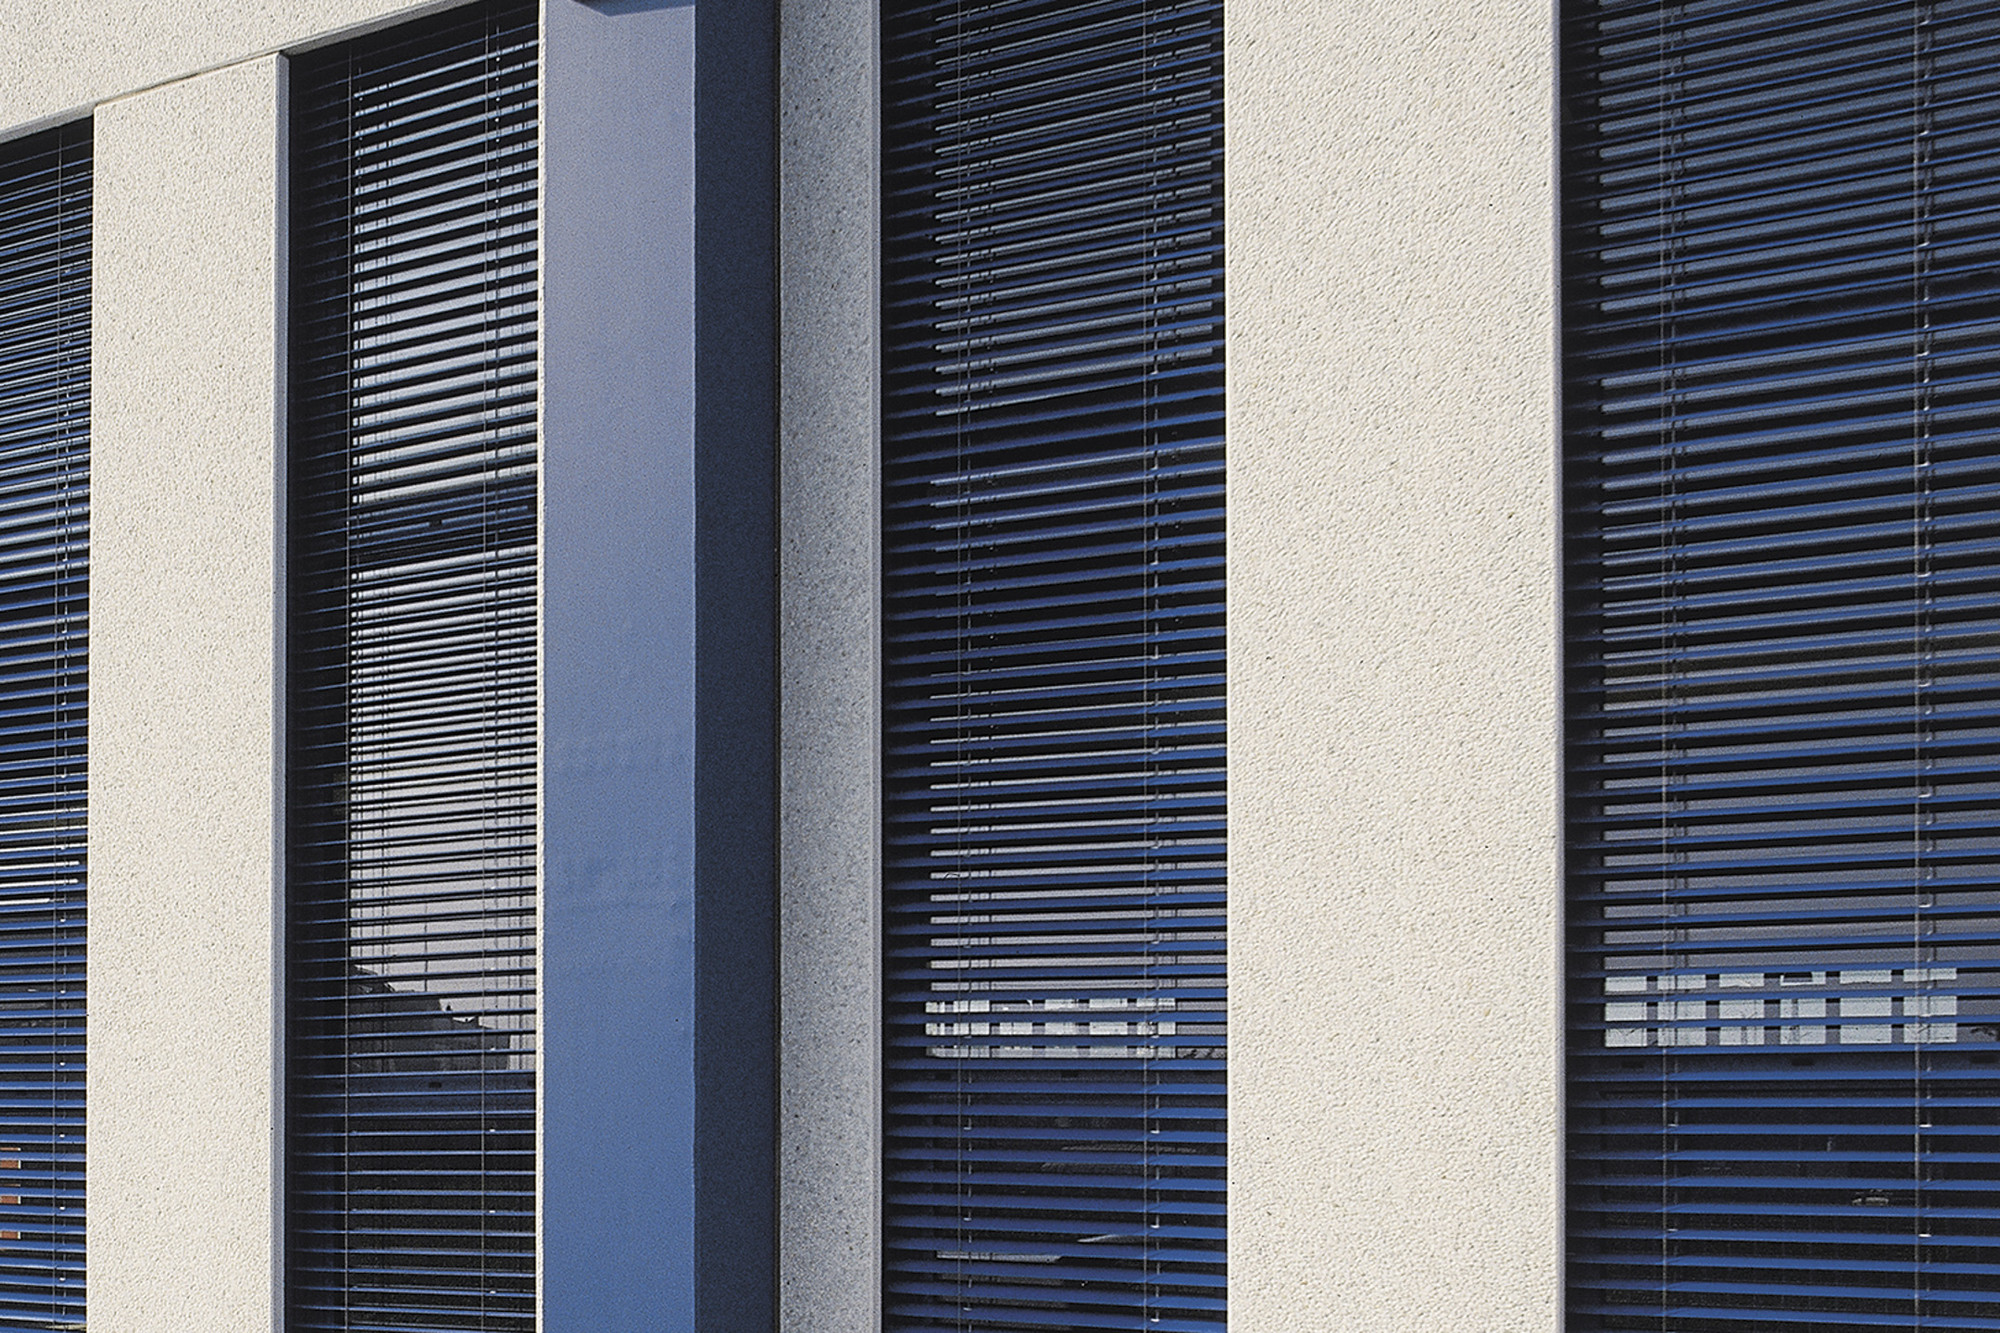 Product: Exterior blinds